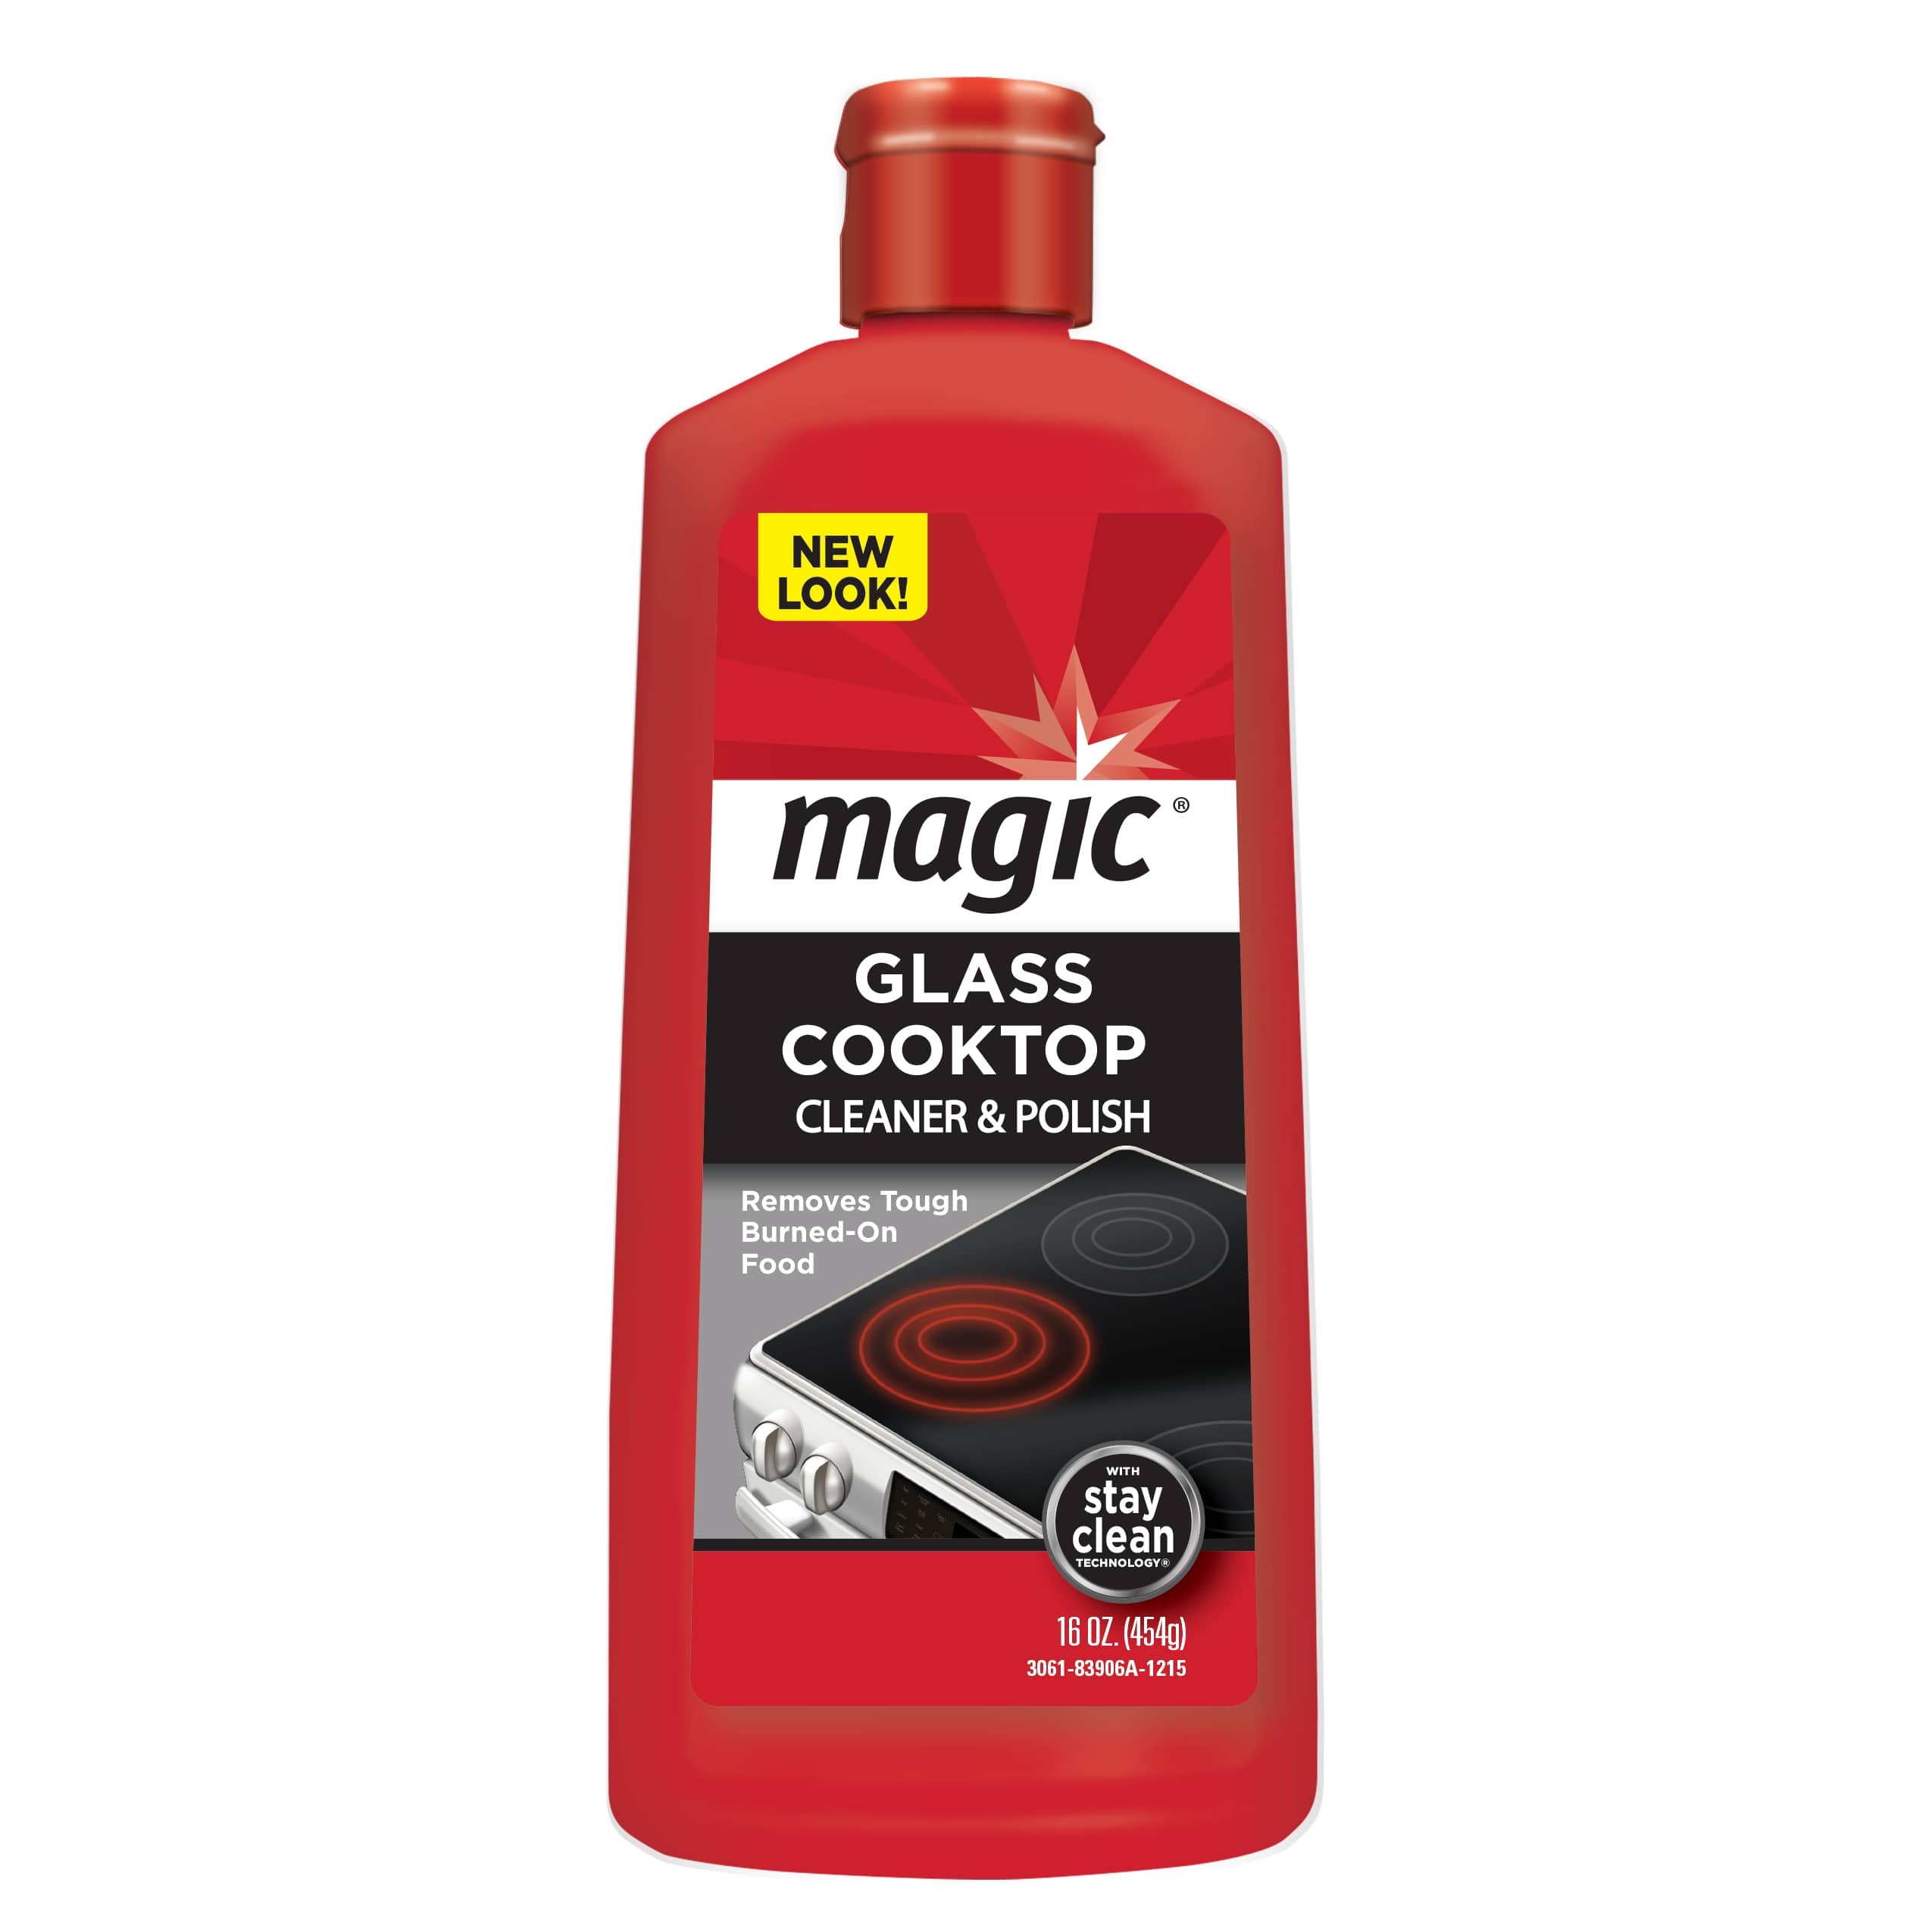 Magic 16-oz Glass Cooktop Cleaner and Polish - Removes Grease